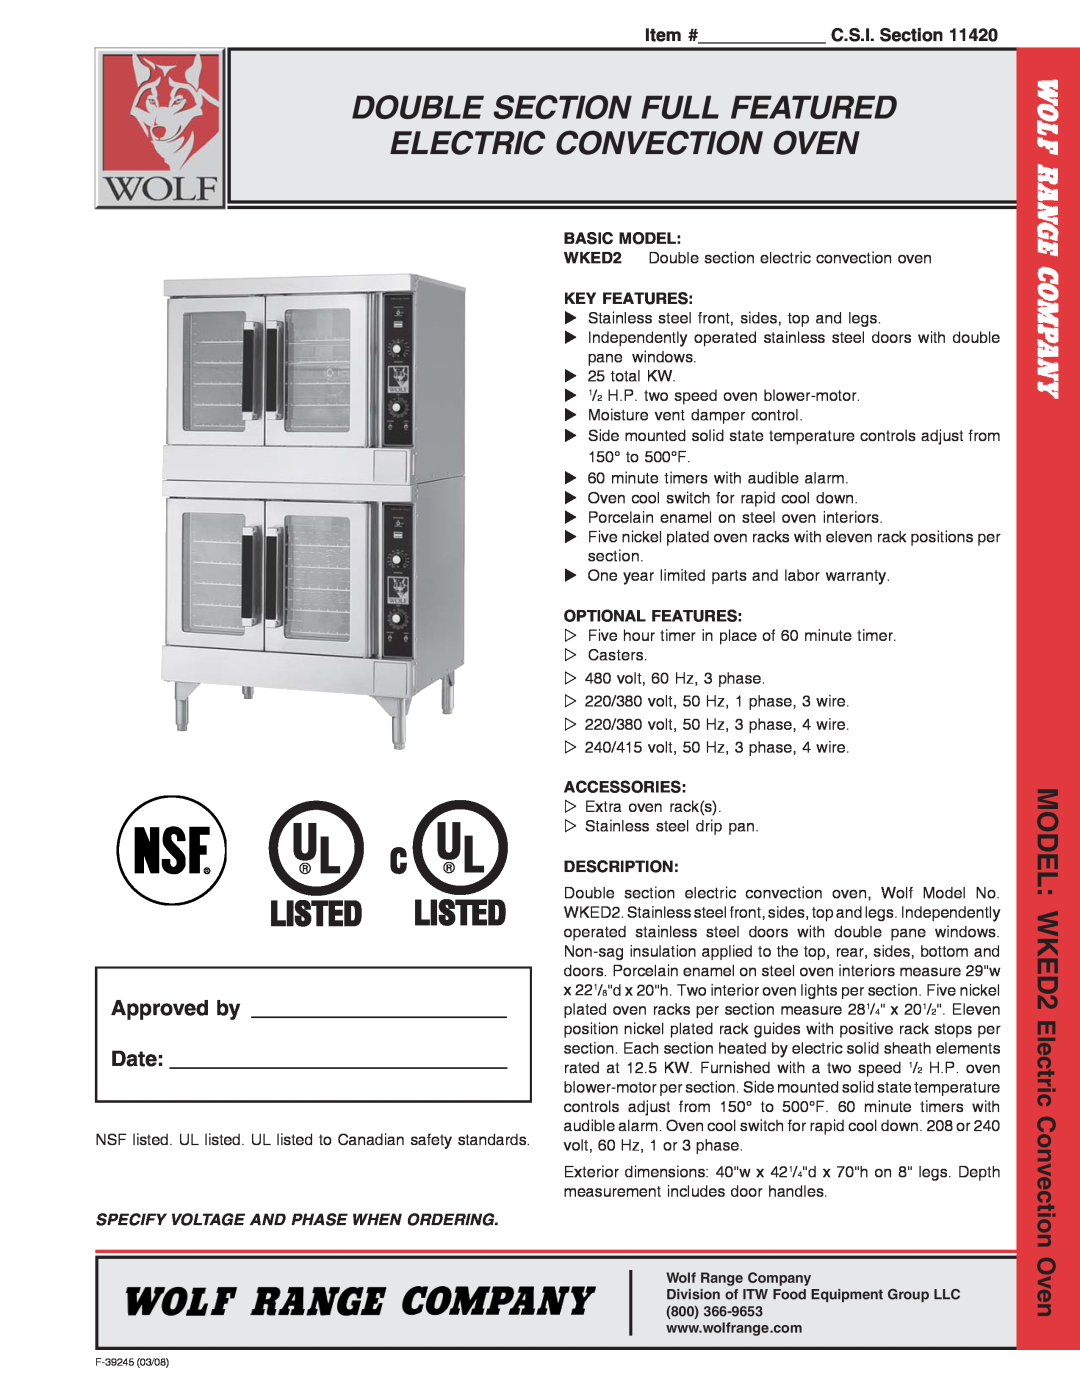 Wolf warranty Double Section Full Featured Electric Convection Oven, MODEL WKED2 Electric Convection, Approved by Date 